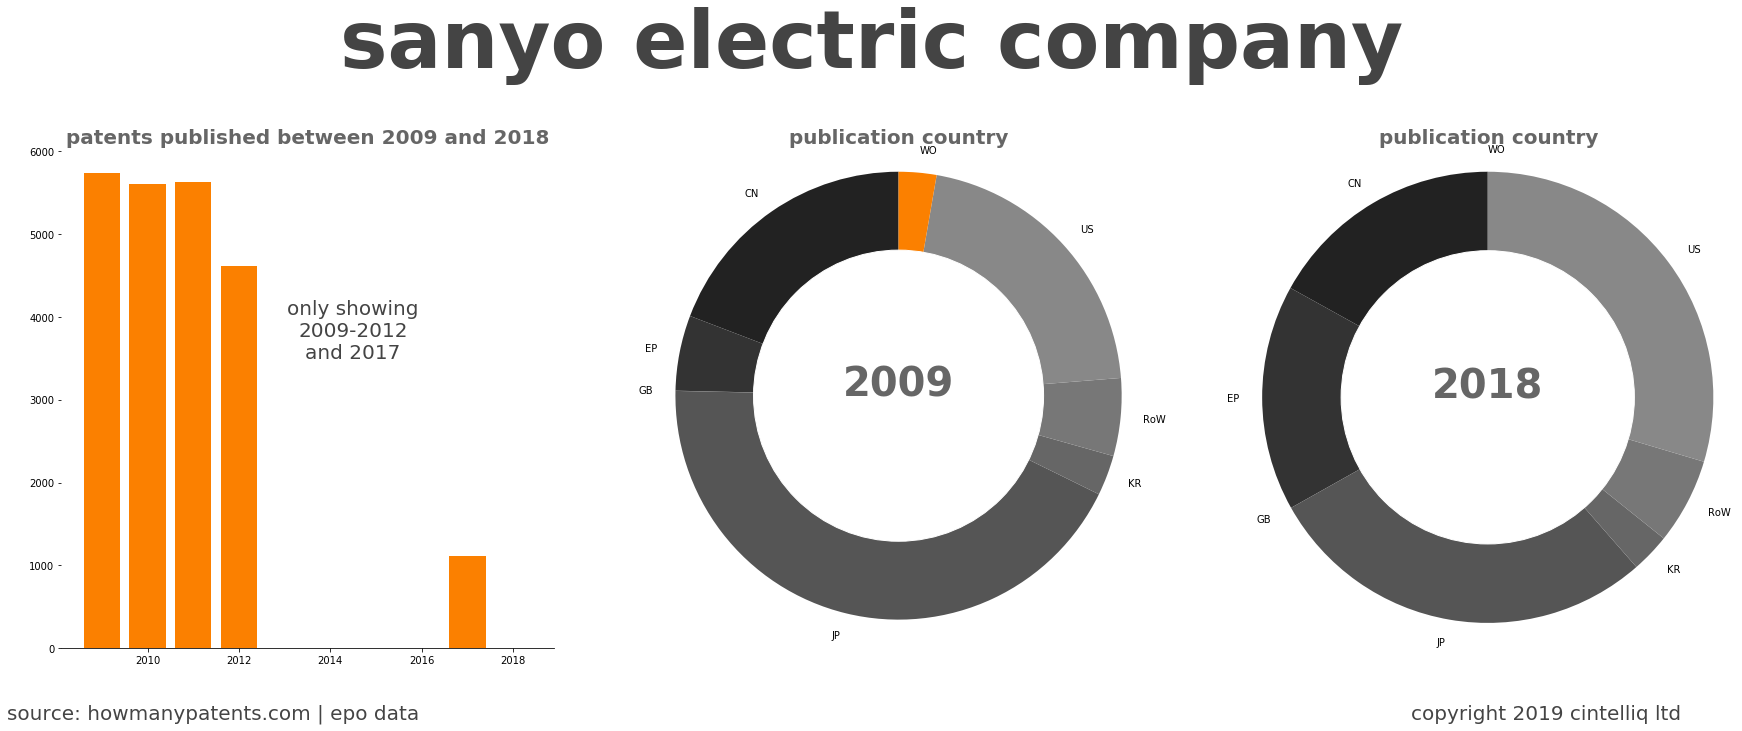 summary of patents for Sanyo Electric Company